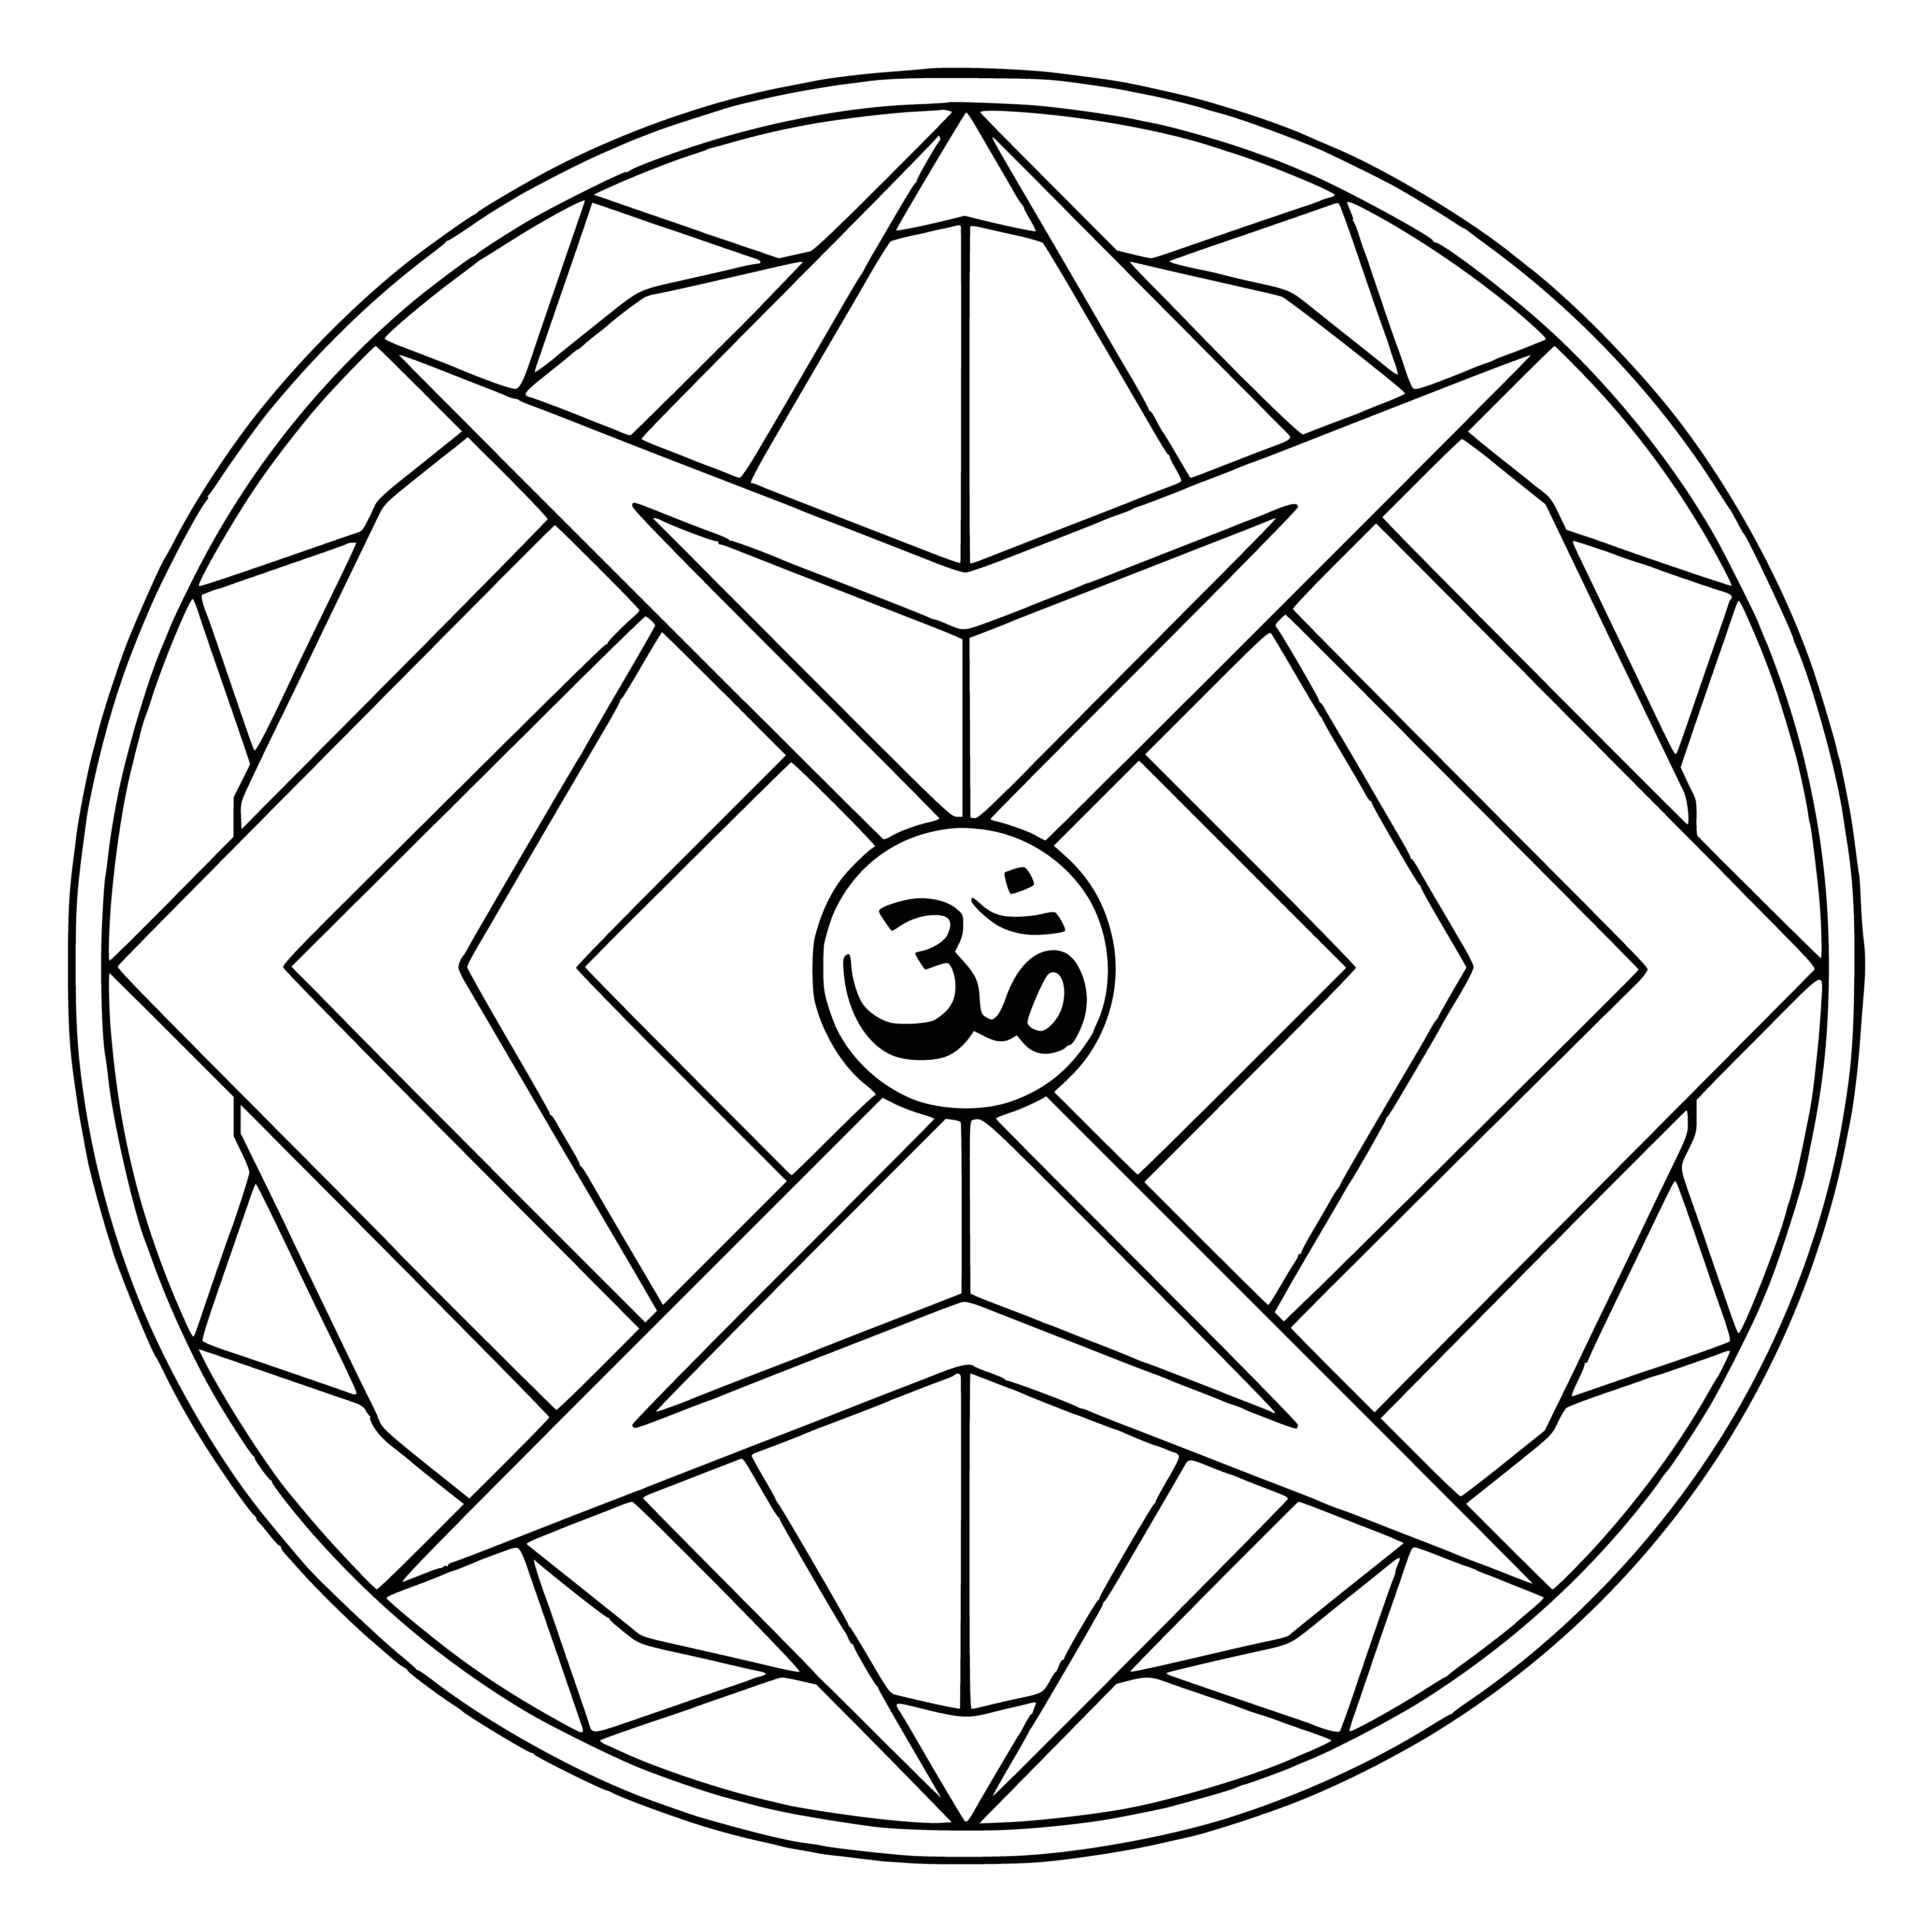 coloring page: Mandala w/ geometric design & Om symbol surrounded by border w/ different patterns.